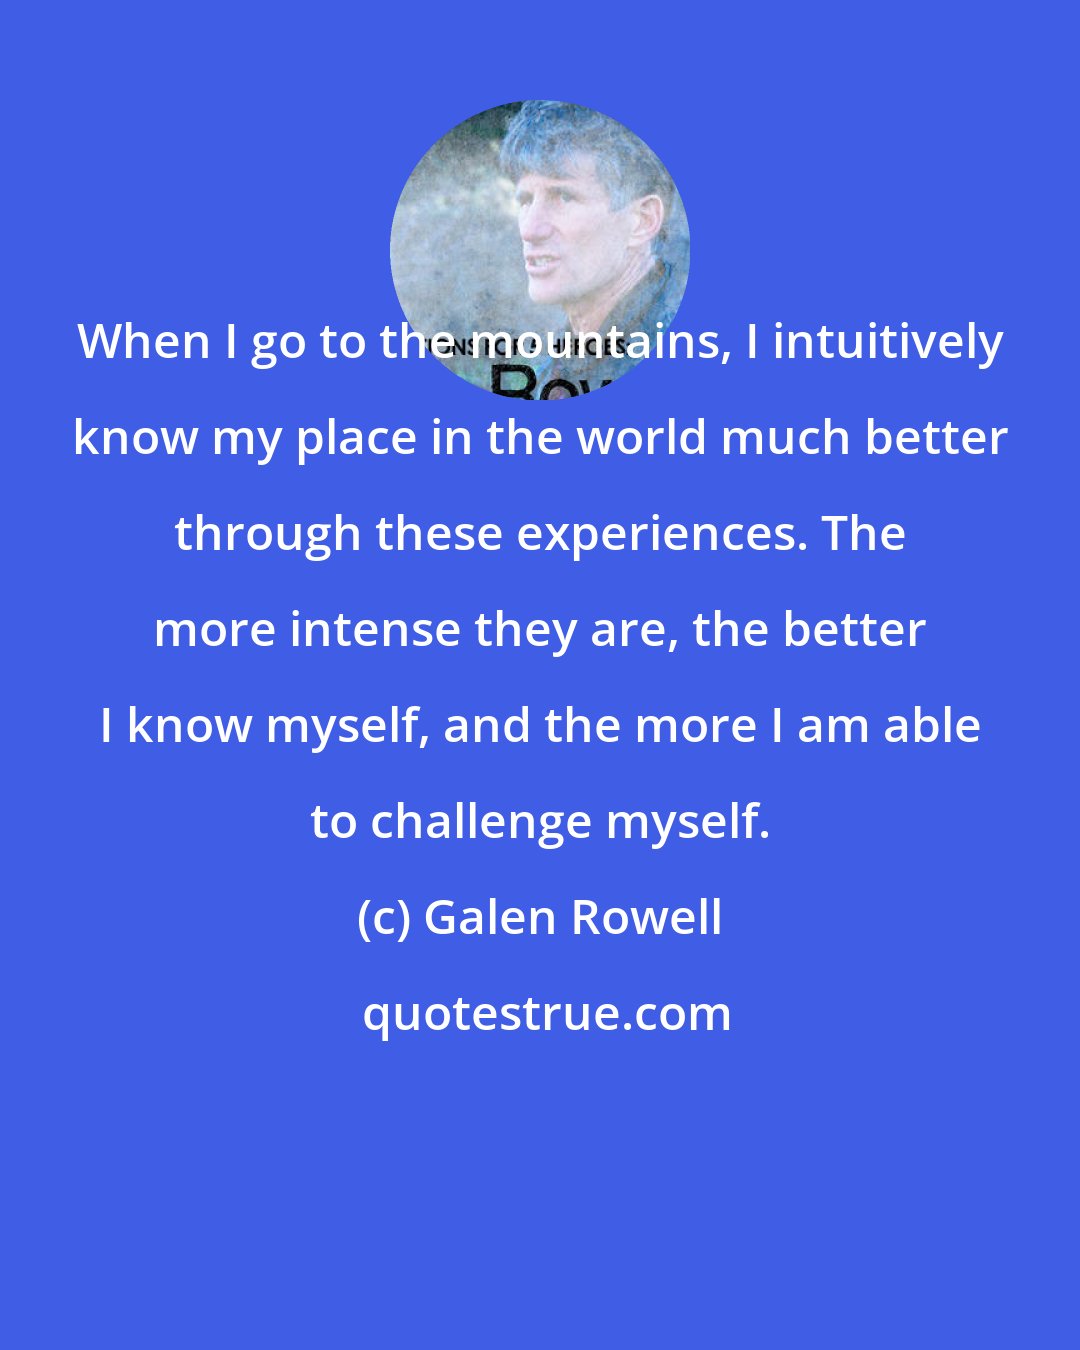 Galen Rowell: When I go to the mountains, I intuitively know my place in the world much better through these experiences. The more intense they are, the better I know myself, and the more I am able to challenge myself.